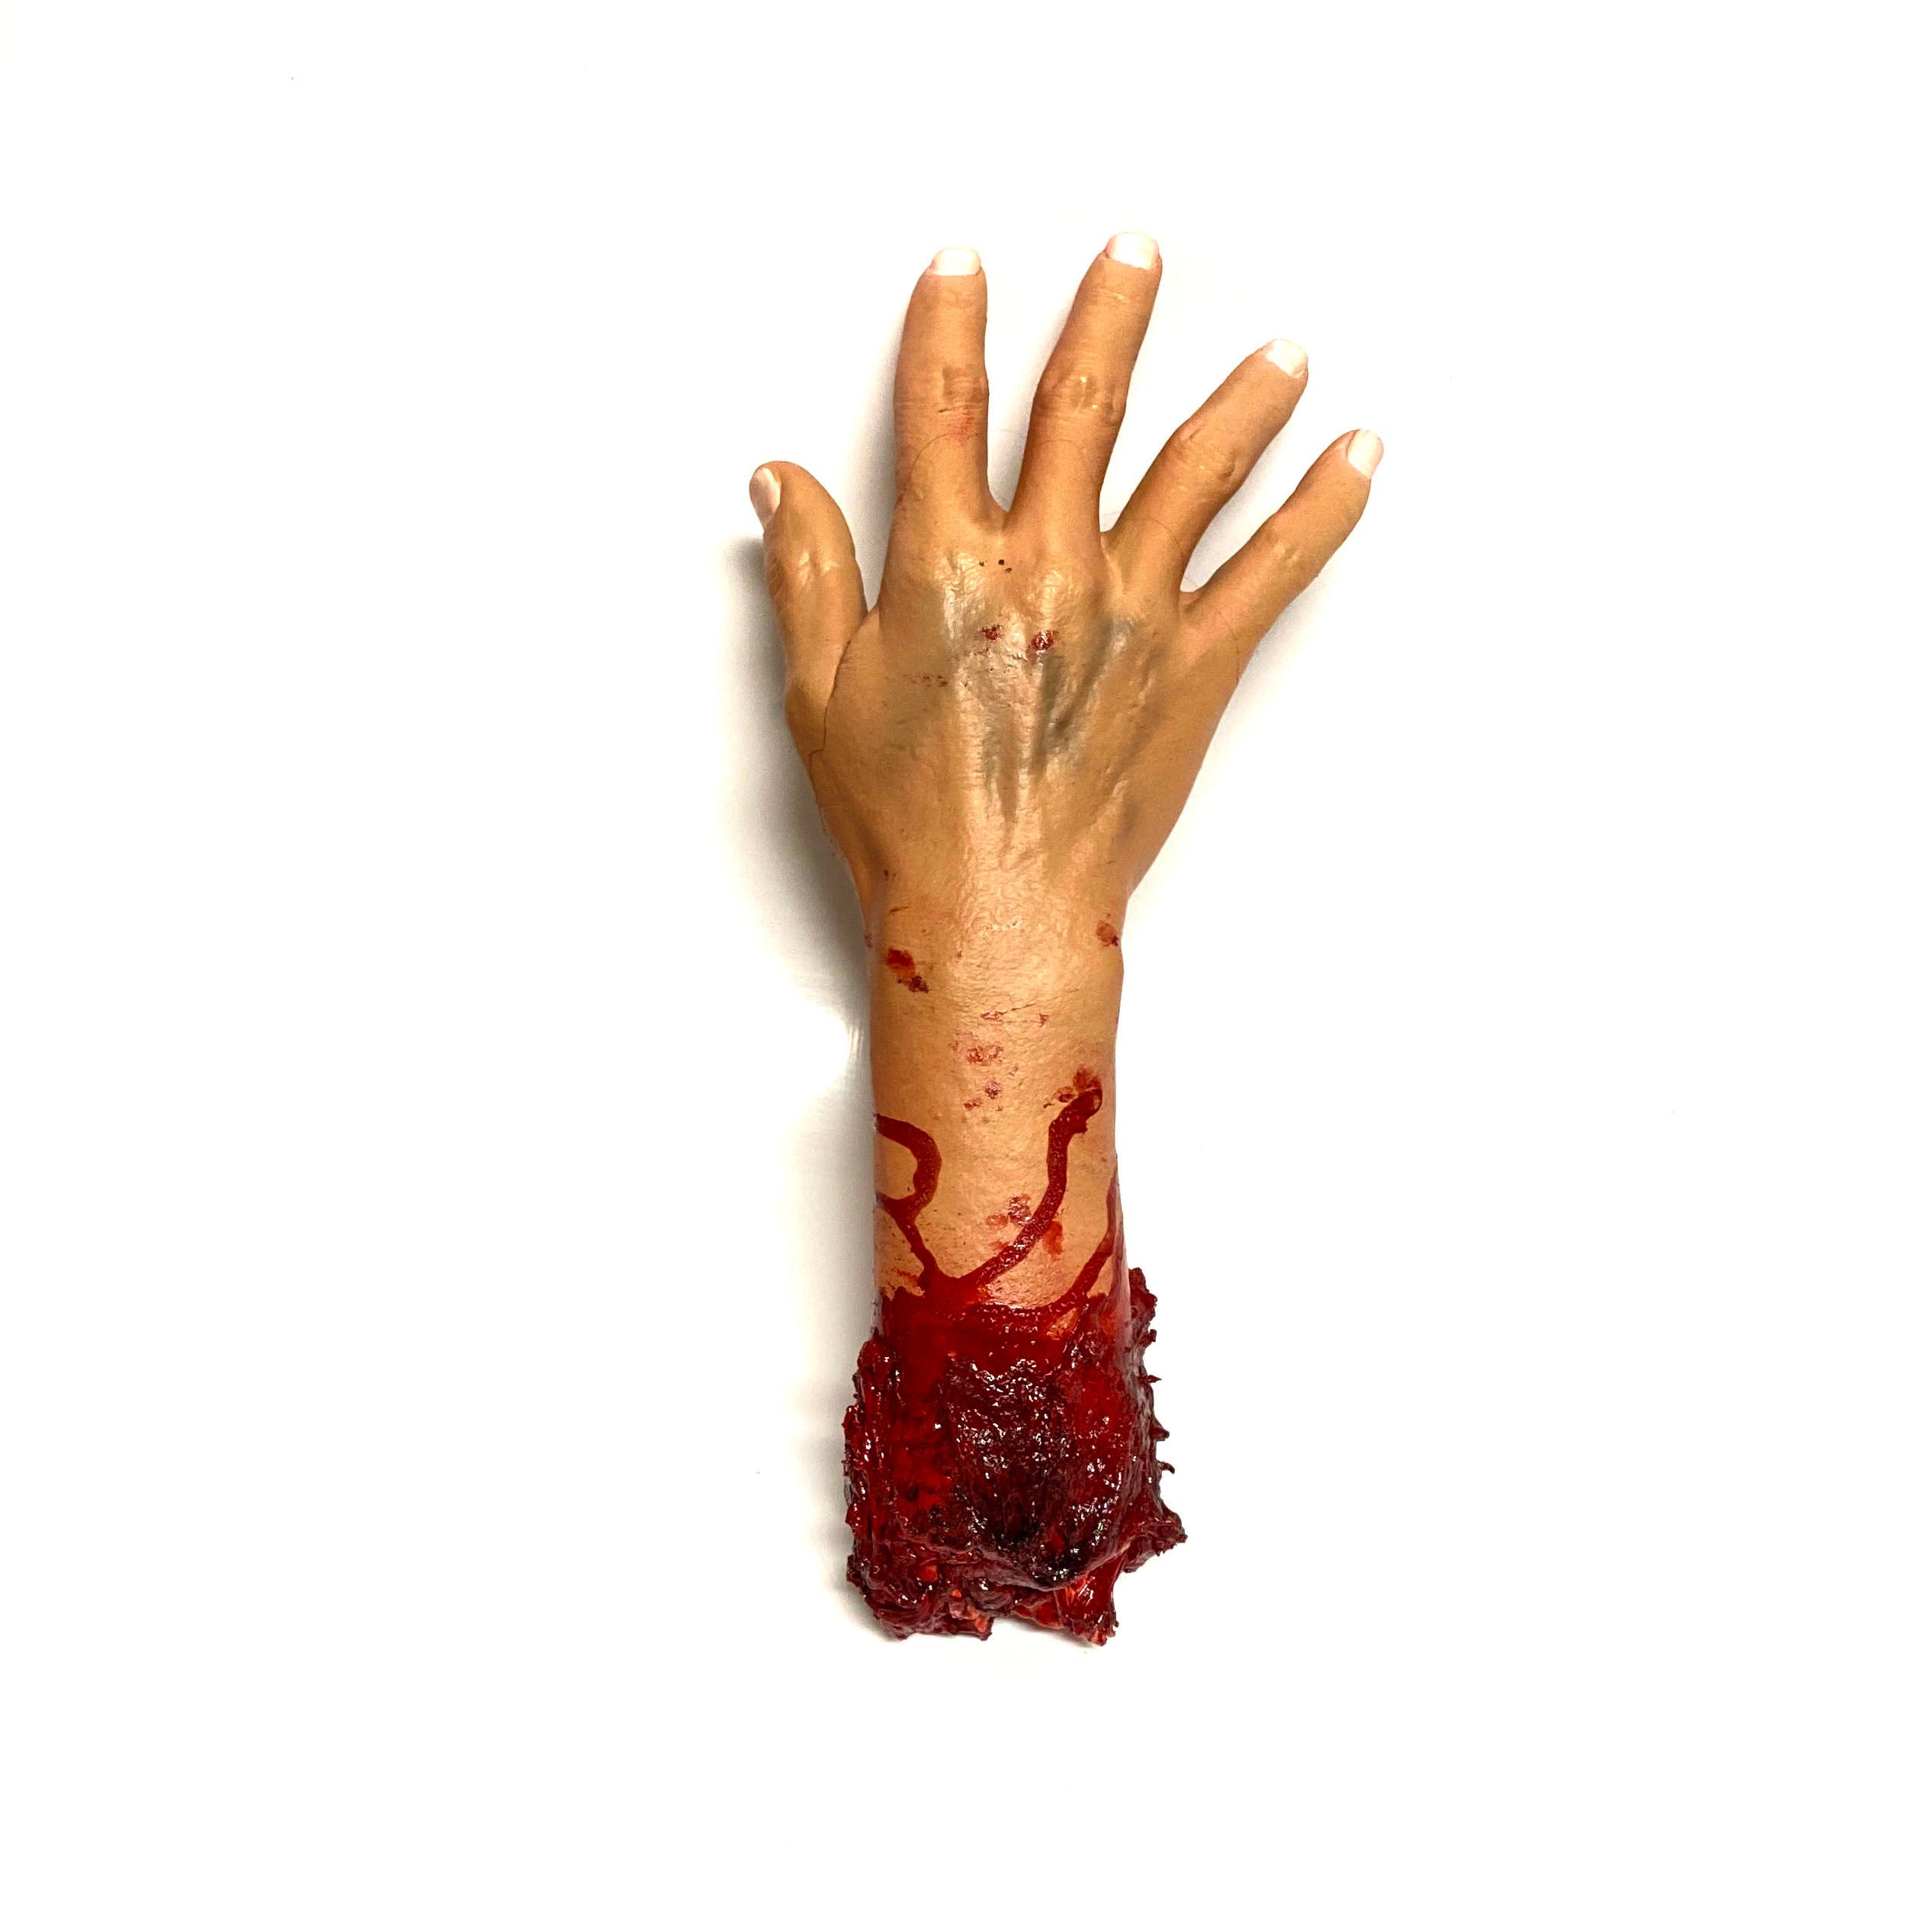 Severed Hand and Wrist - Foam Rubber with Gore Effects - Right - Right Hand